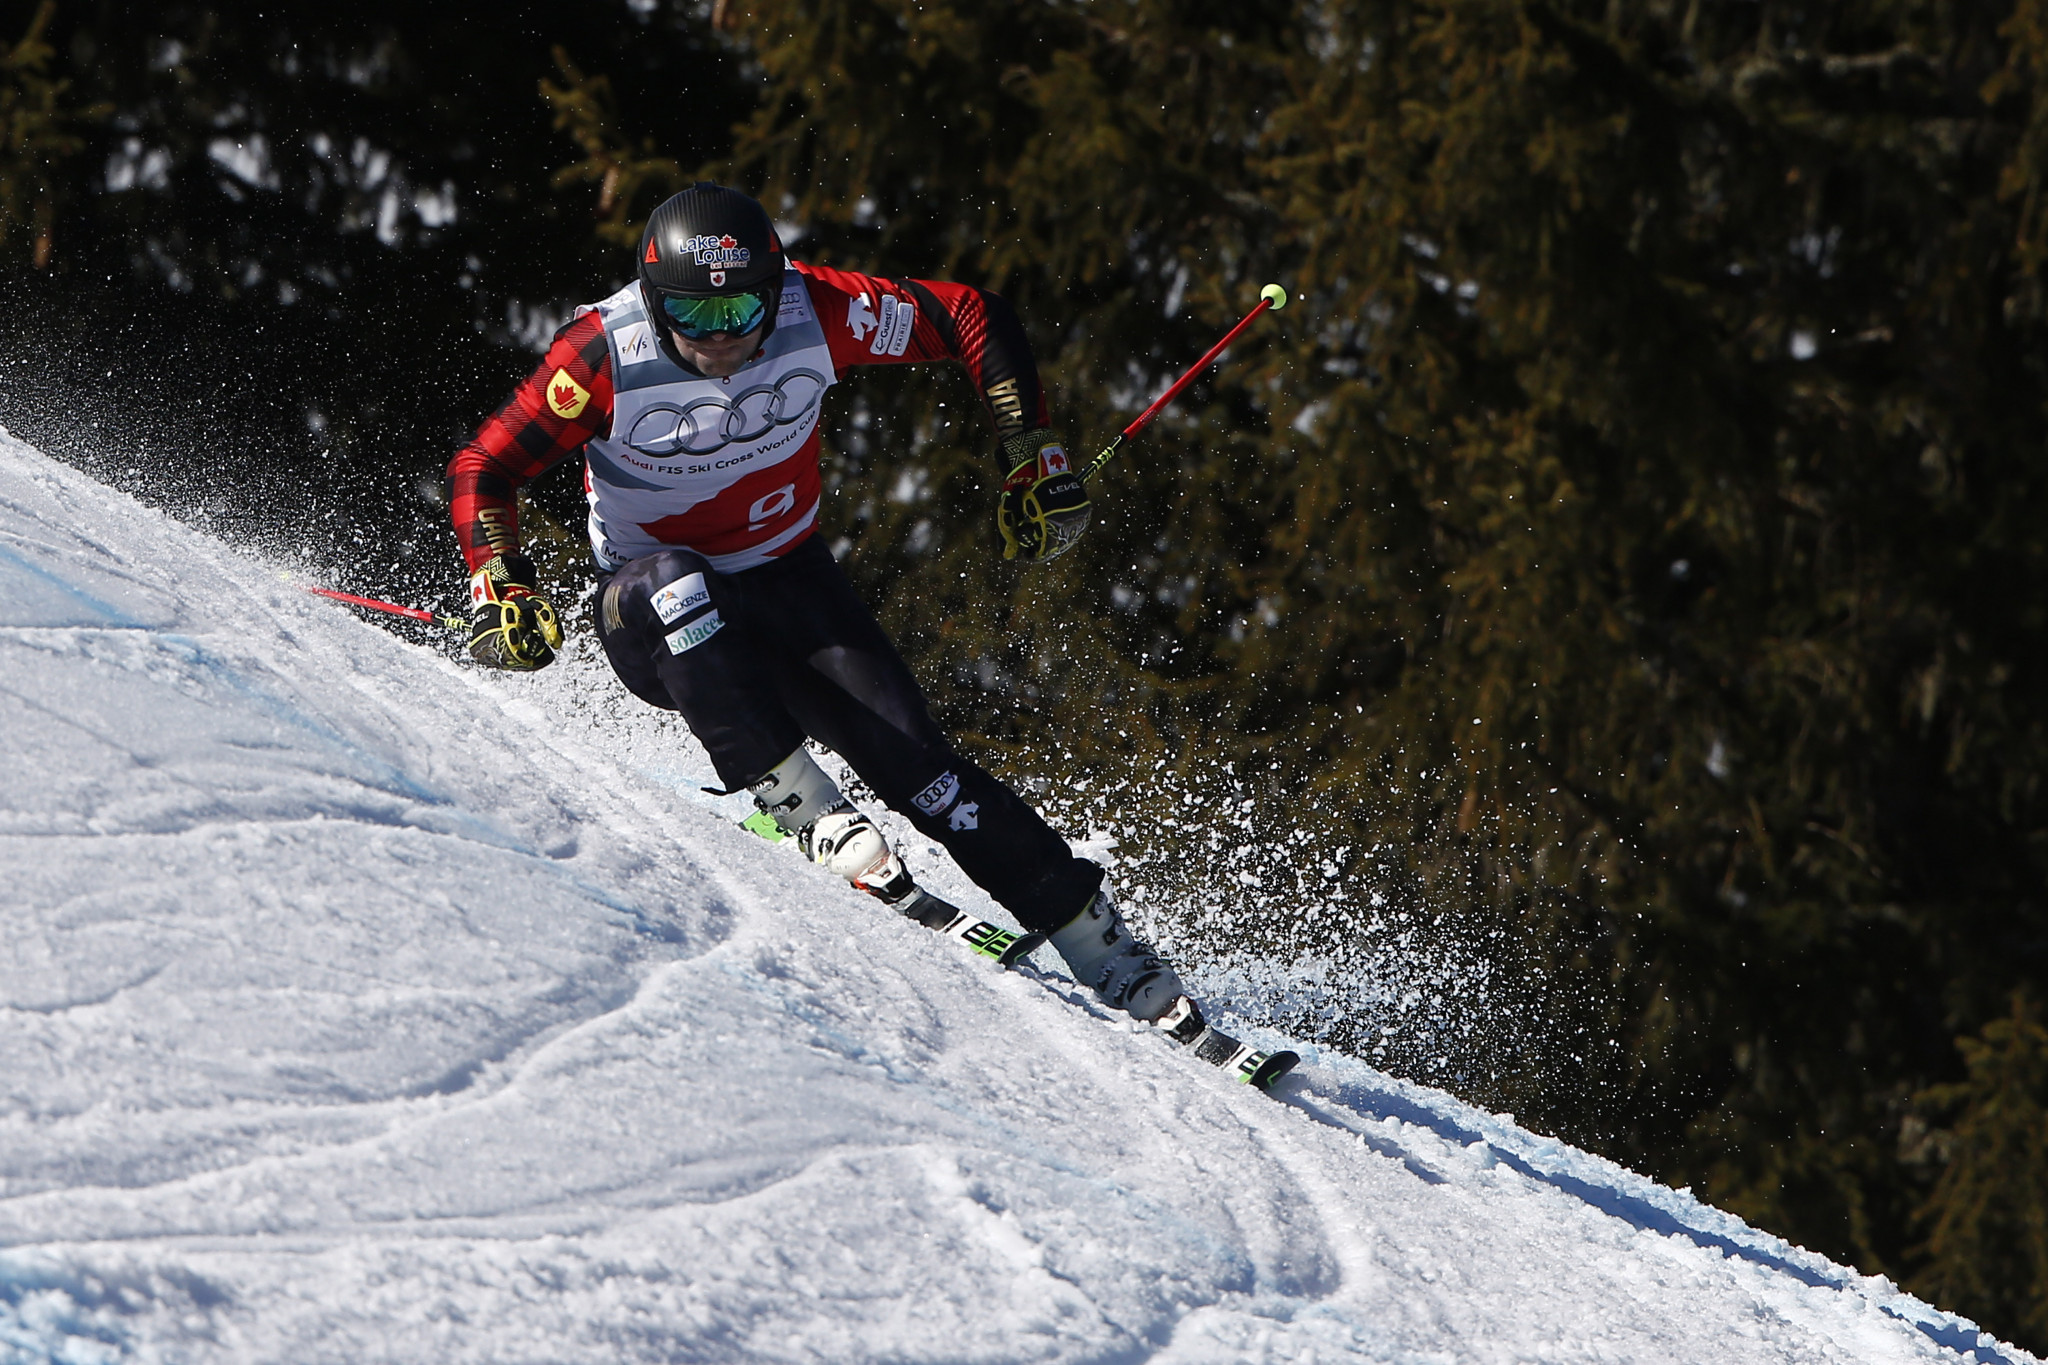 Olympic champion Leman and Kennedy-Sim fastest in Ski Cross World Cup qualifying in Arosa